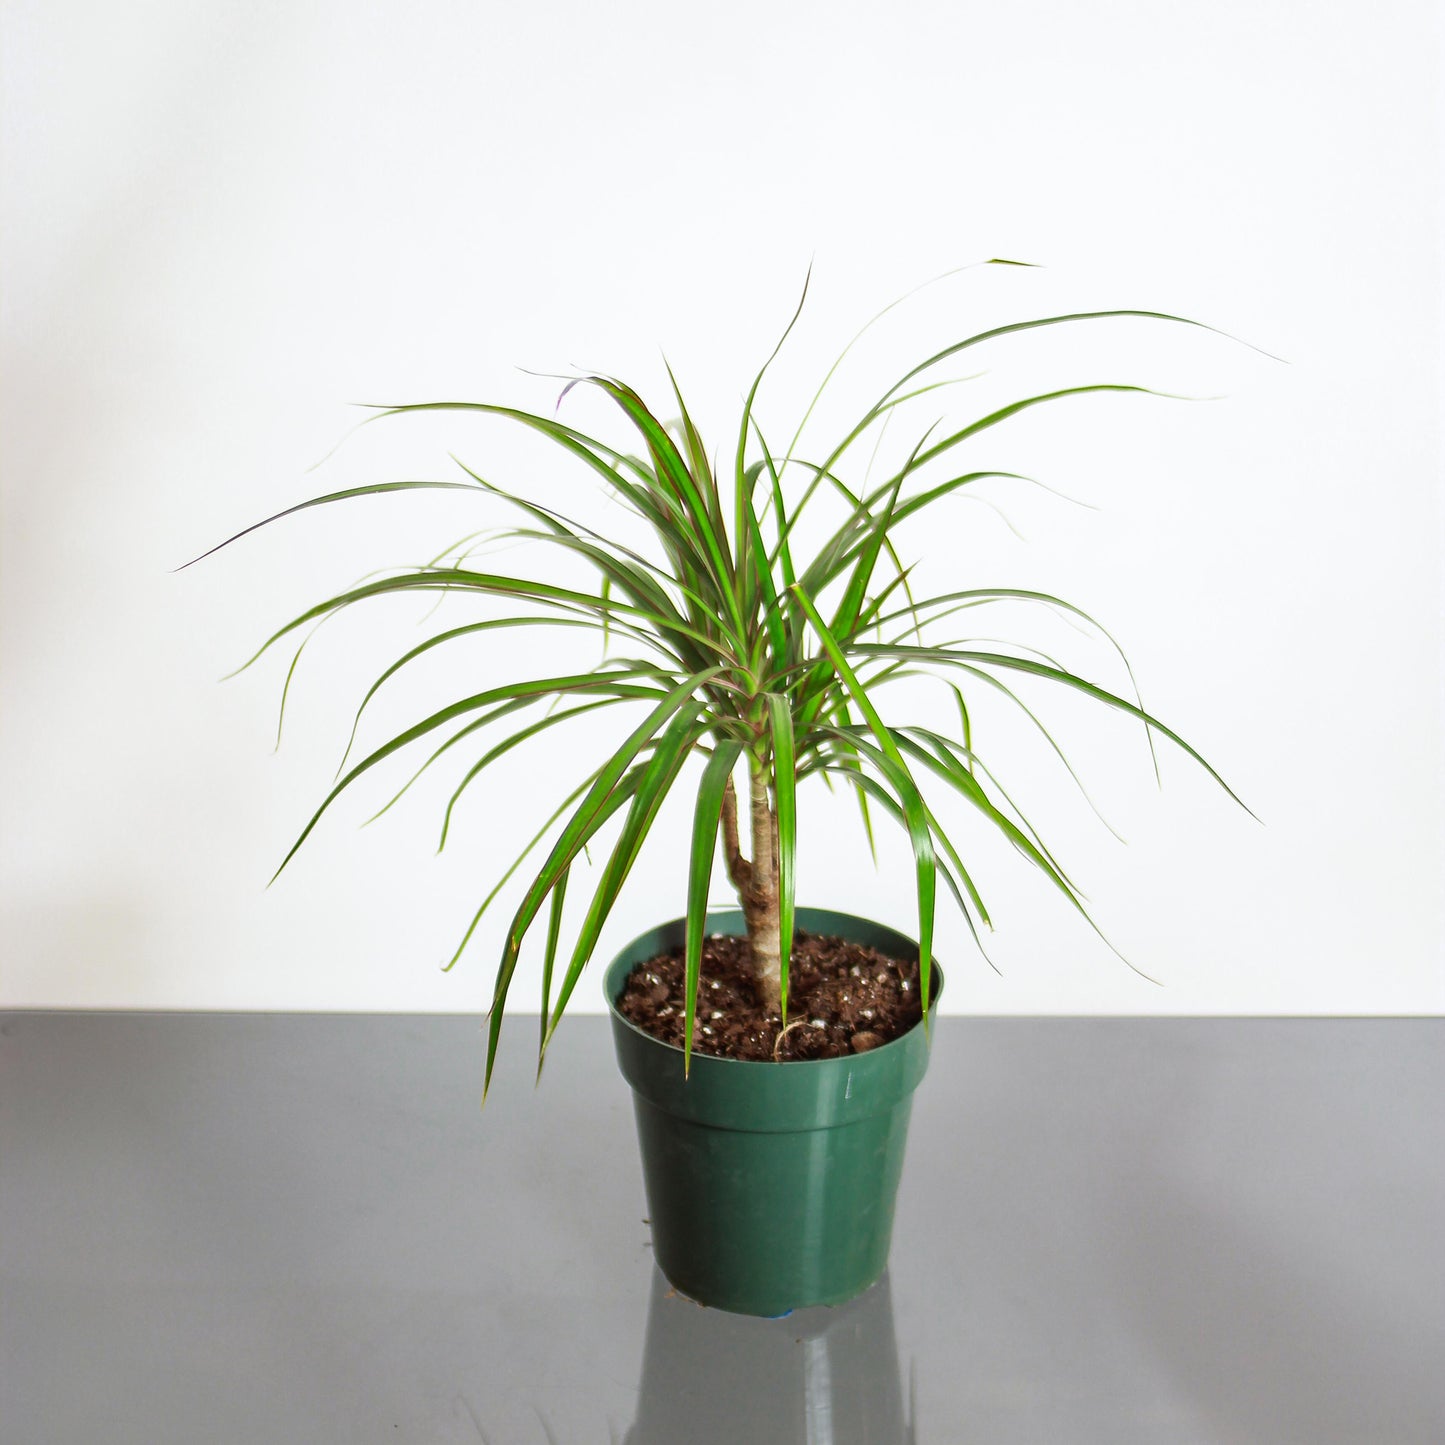 Aboera, Dracaena (Dracaena marginata) in a 6 inch pot. Indoor plant for sale by Promise Supply for delivery and pickup in Toronto